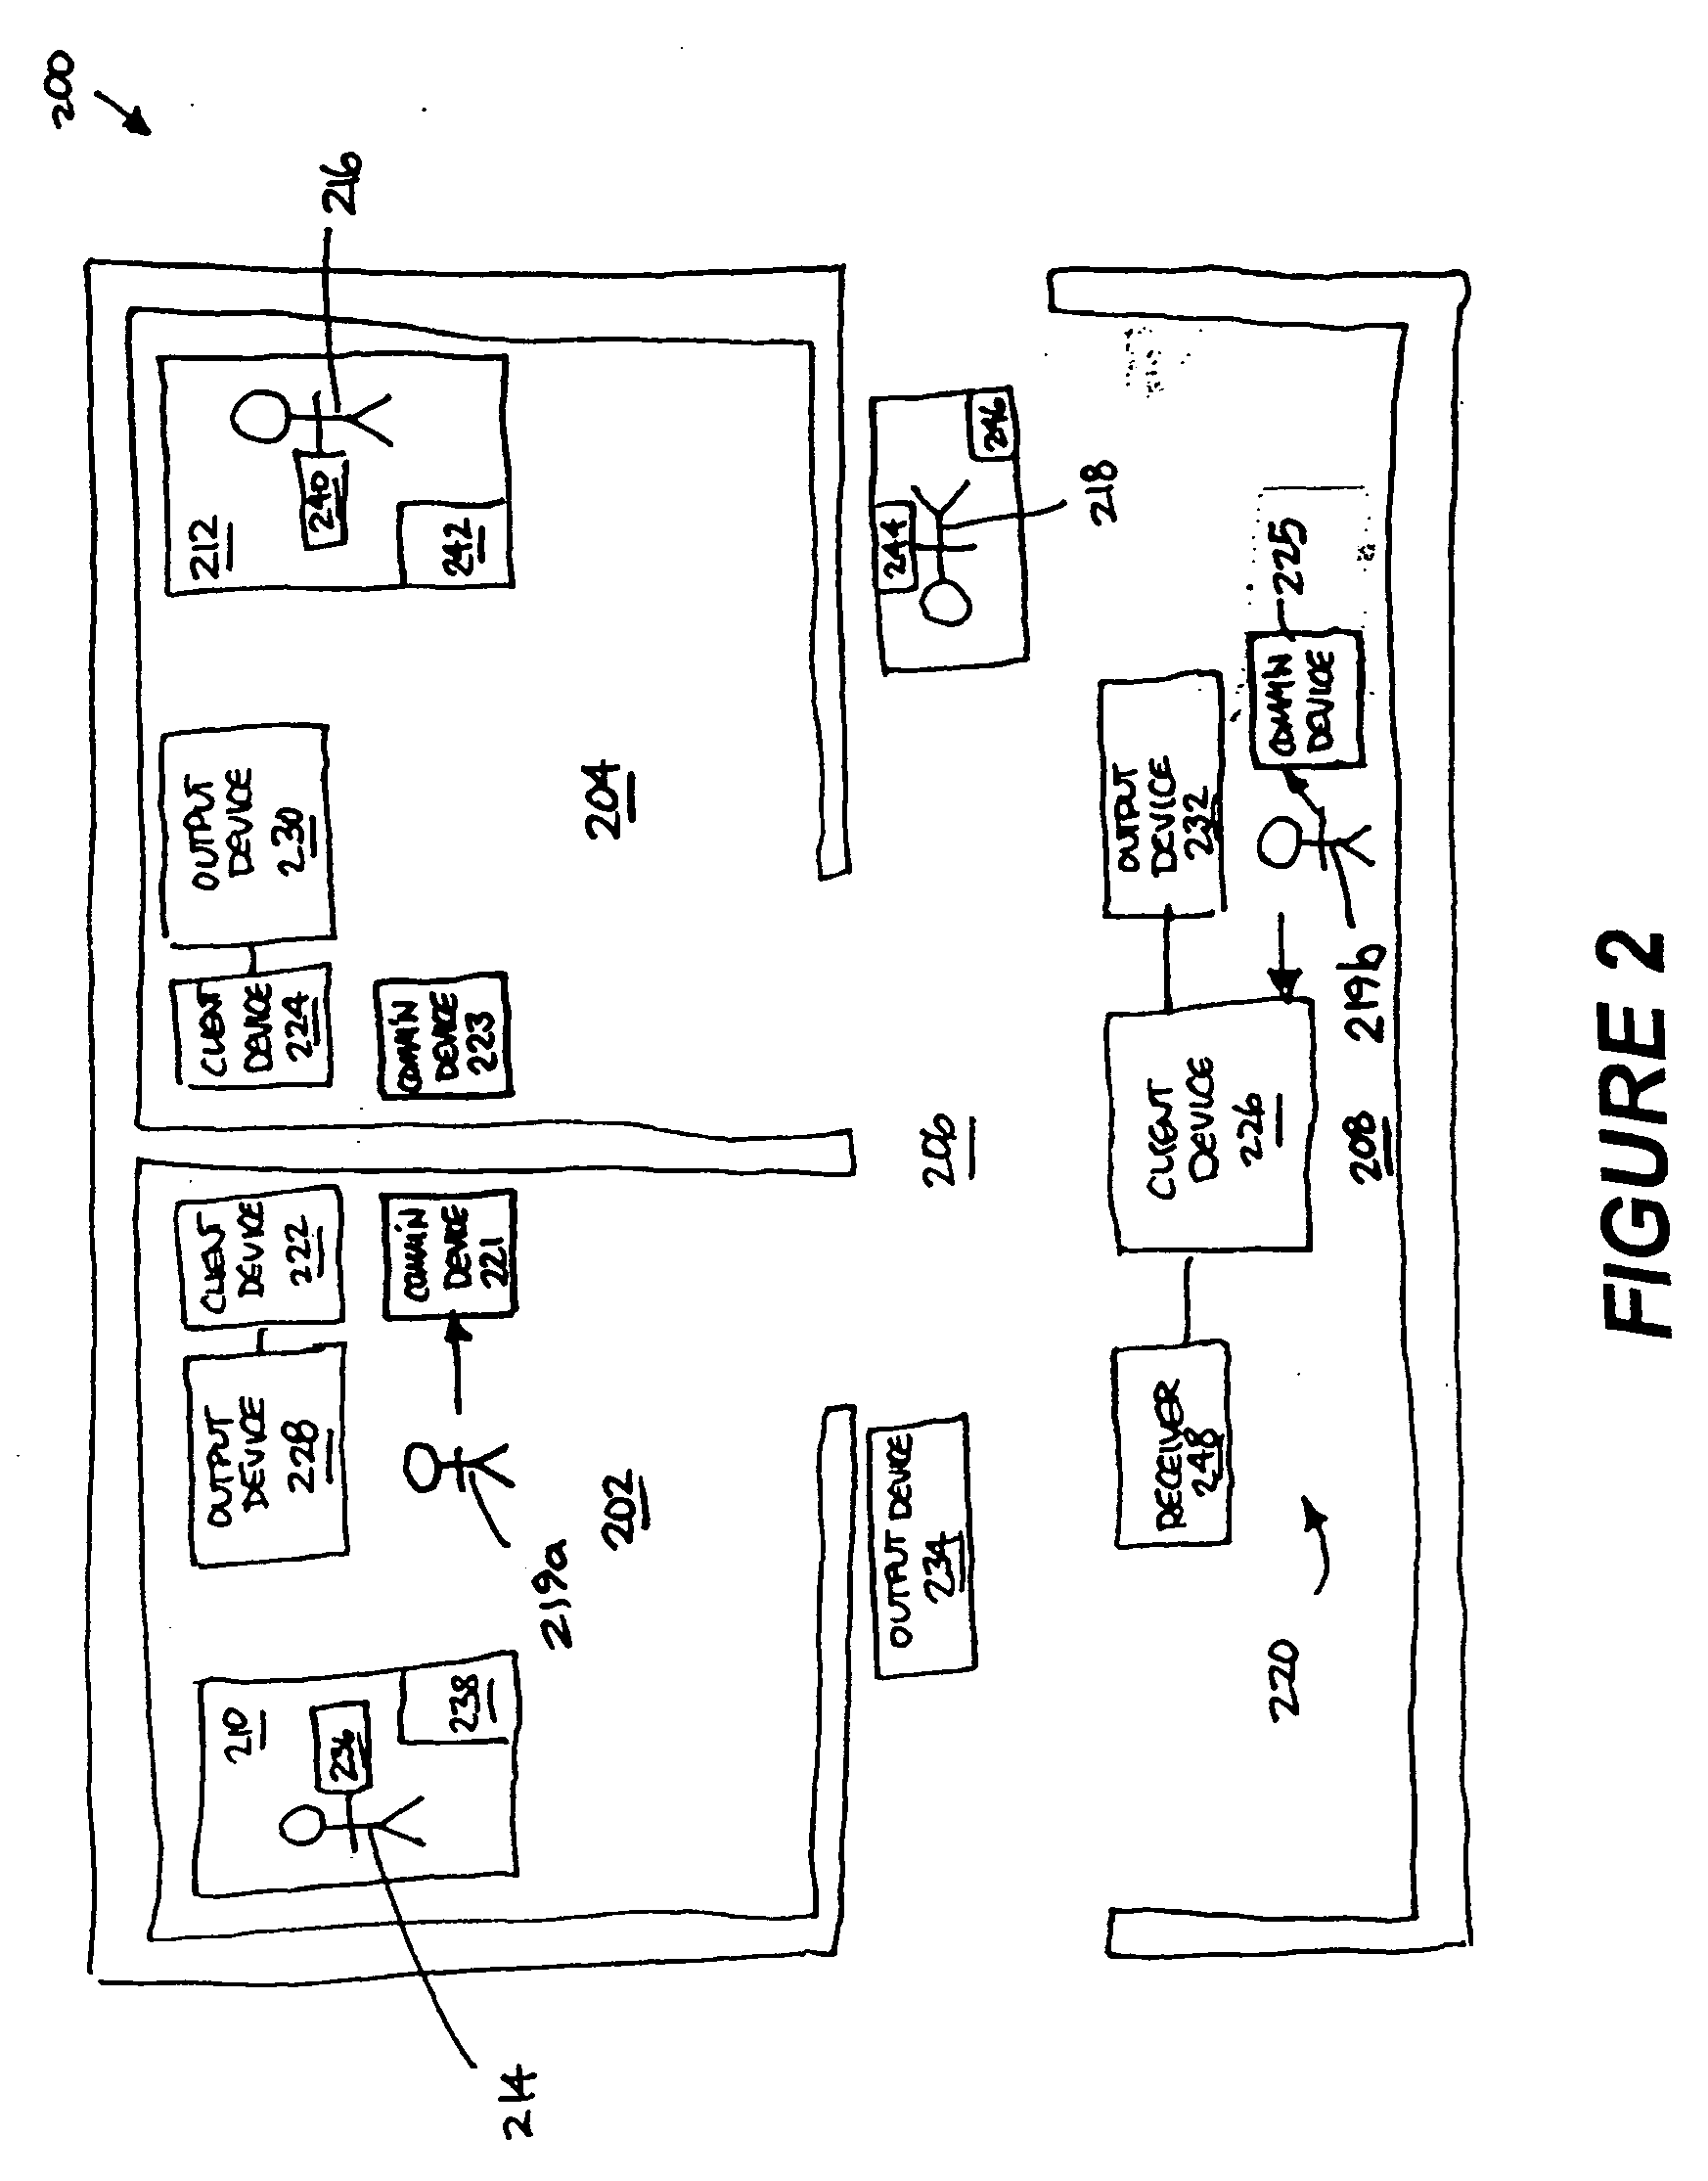 Methods, systems, and apparatus for providing a notification of a message in a health care environment